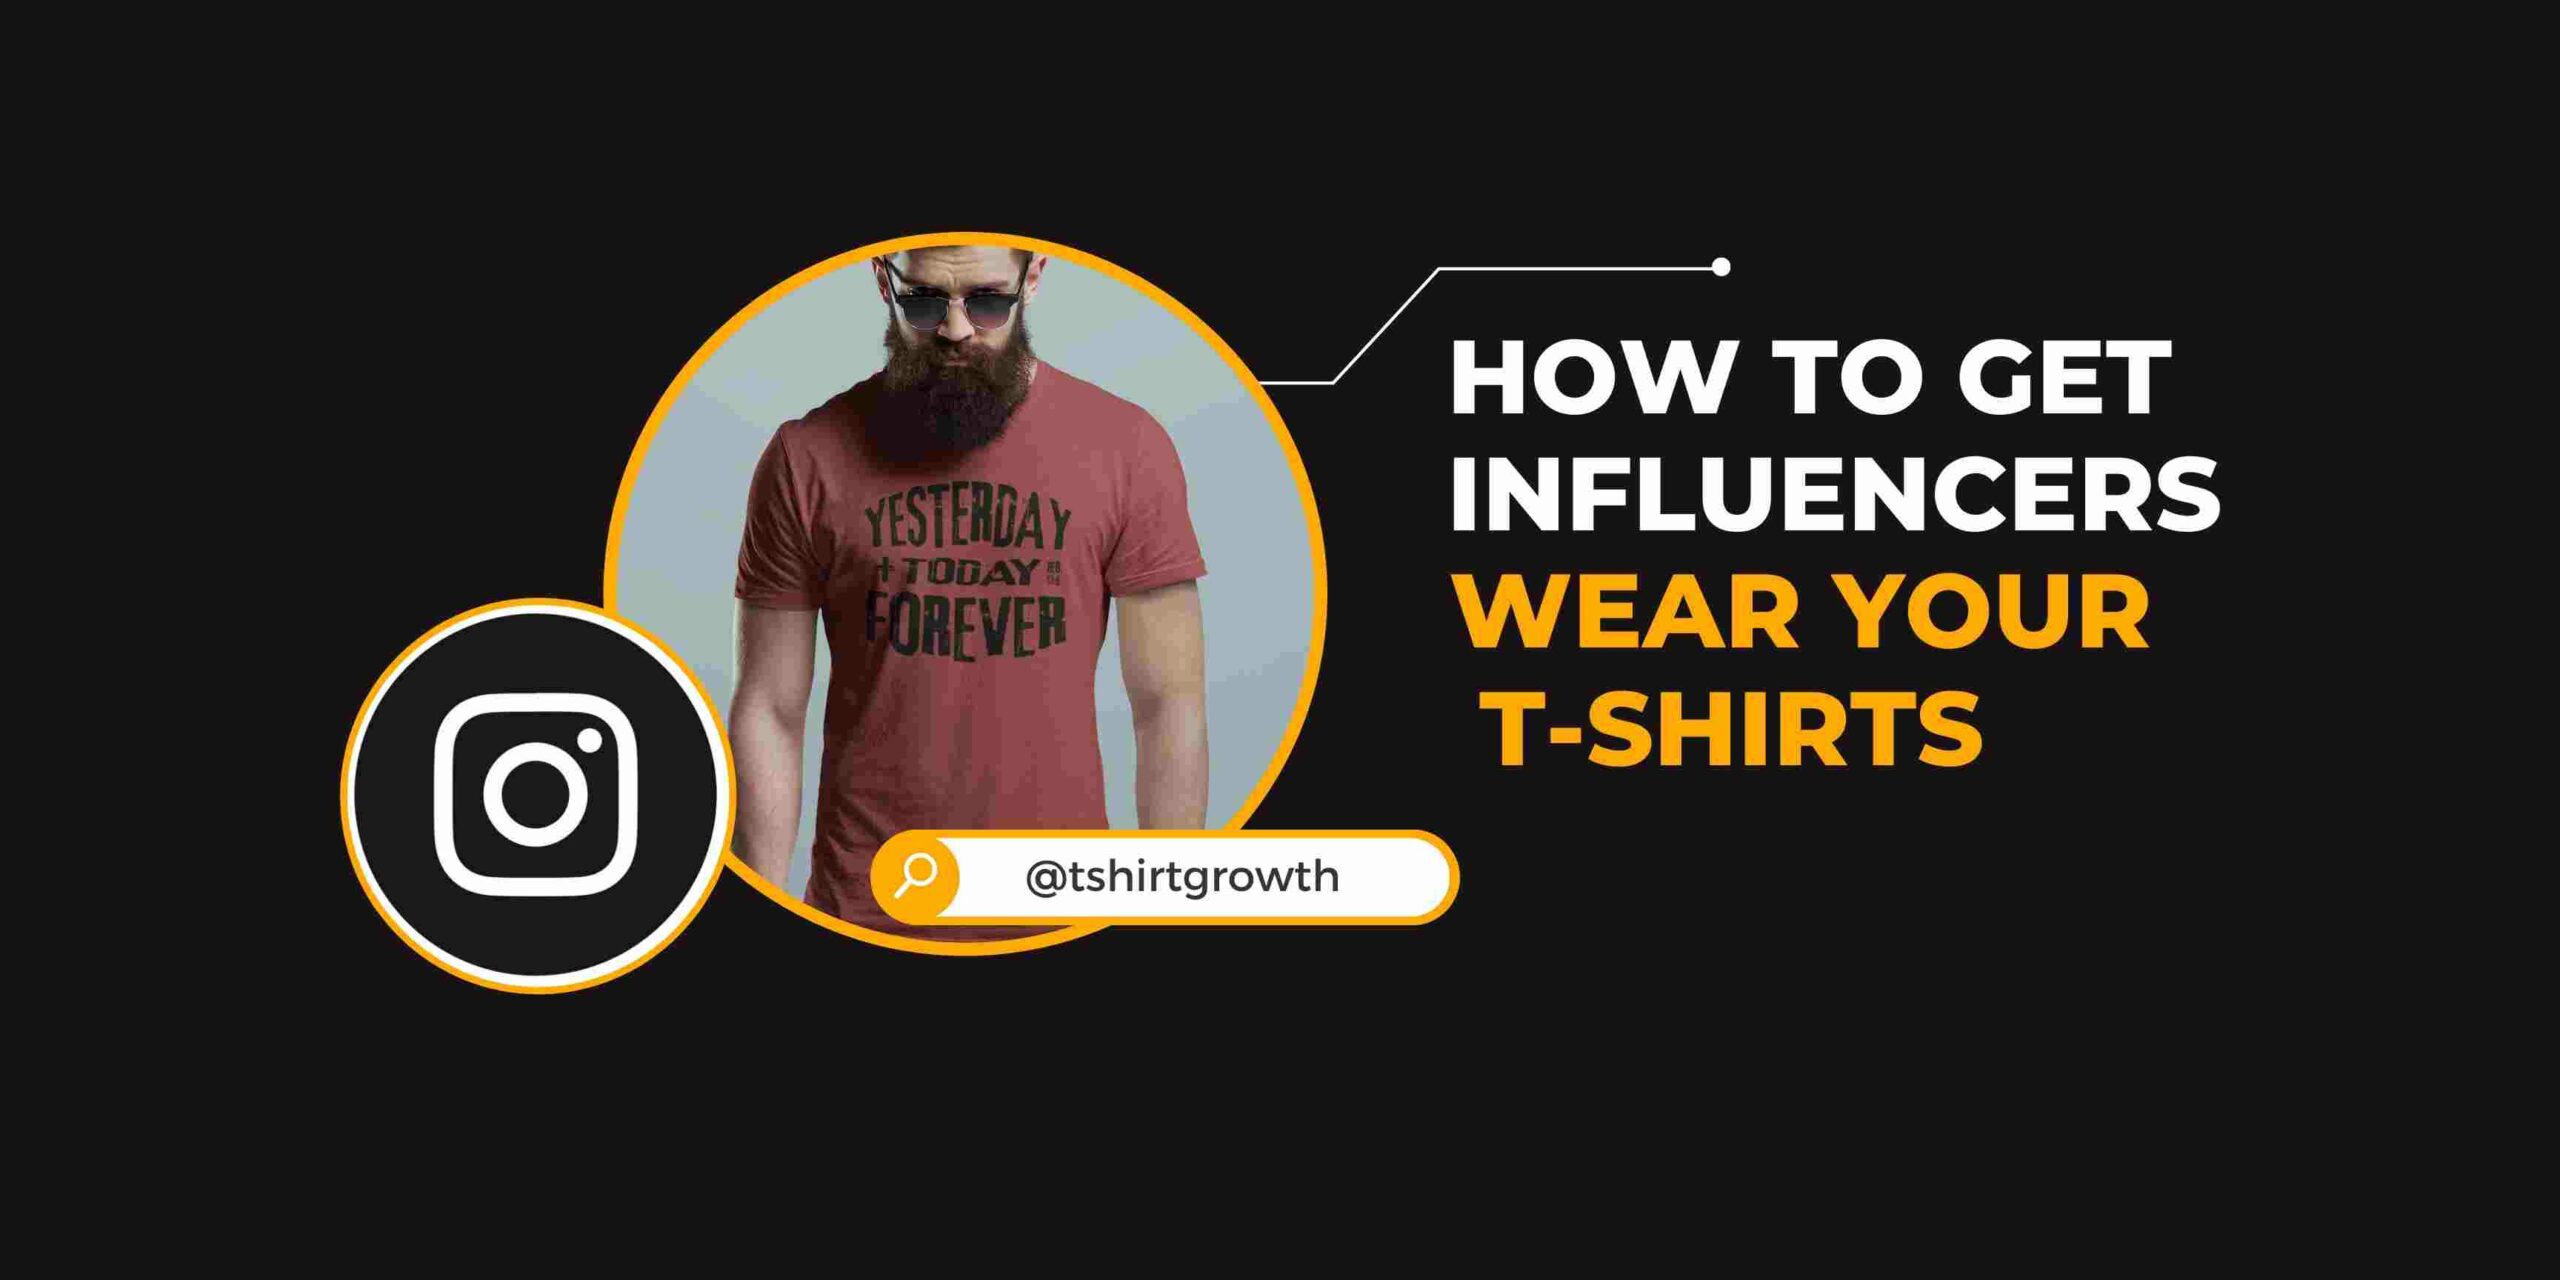 How to Get Influencers to wear your t-shirts